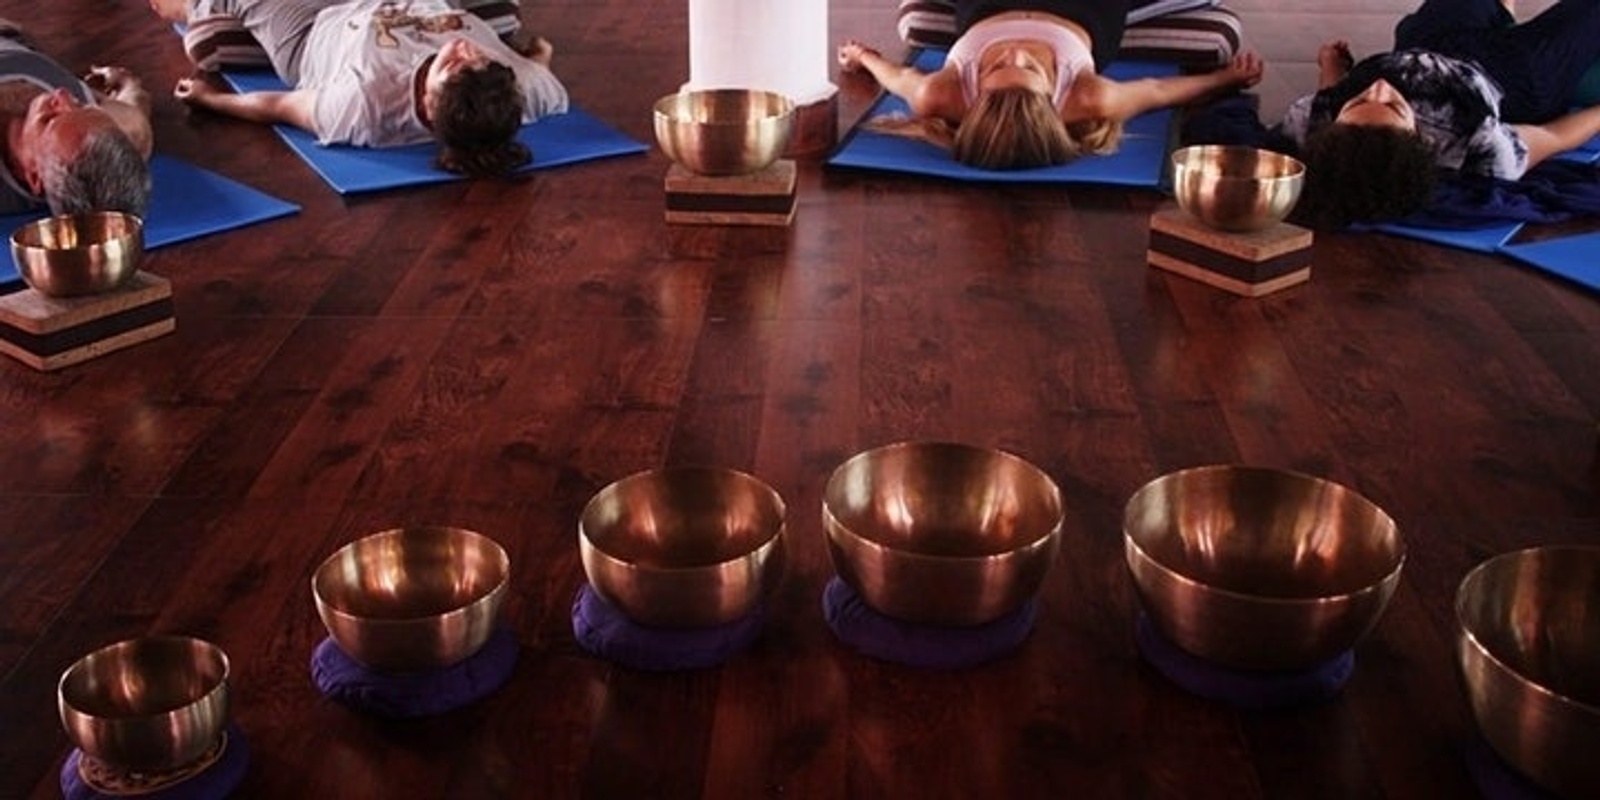 Private group: Sound Healing and Chakra Meditation - on request